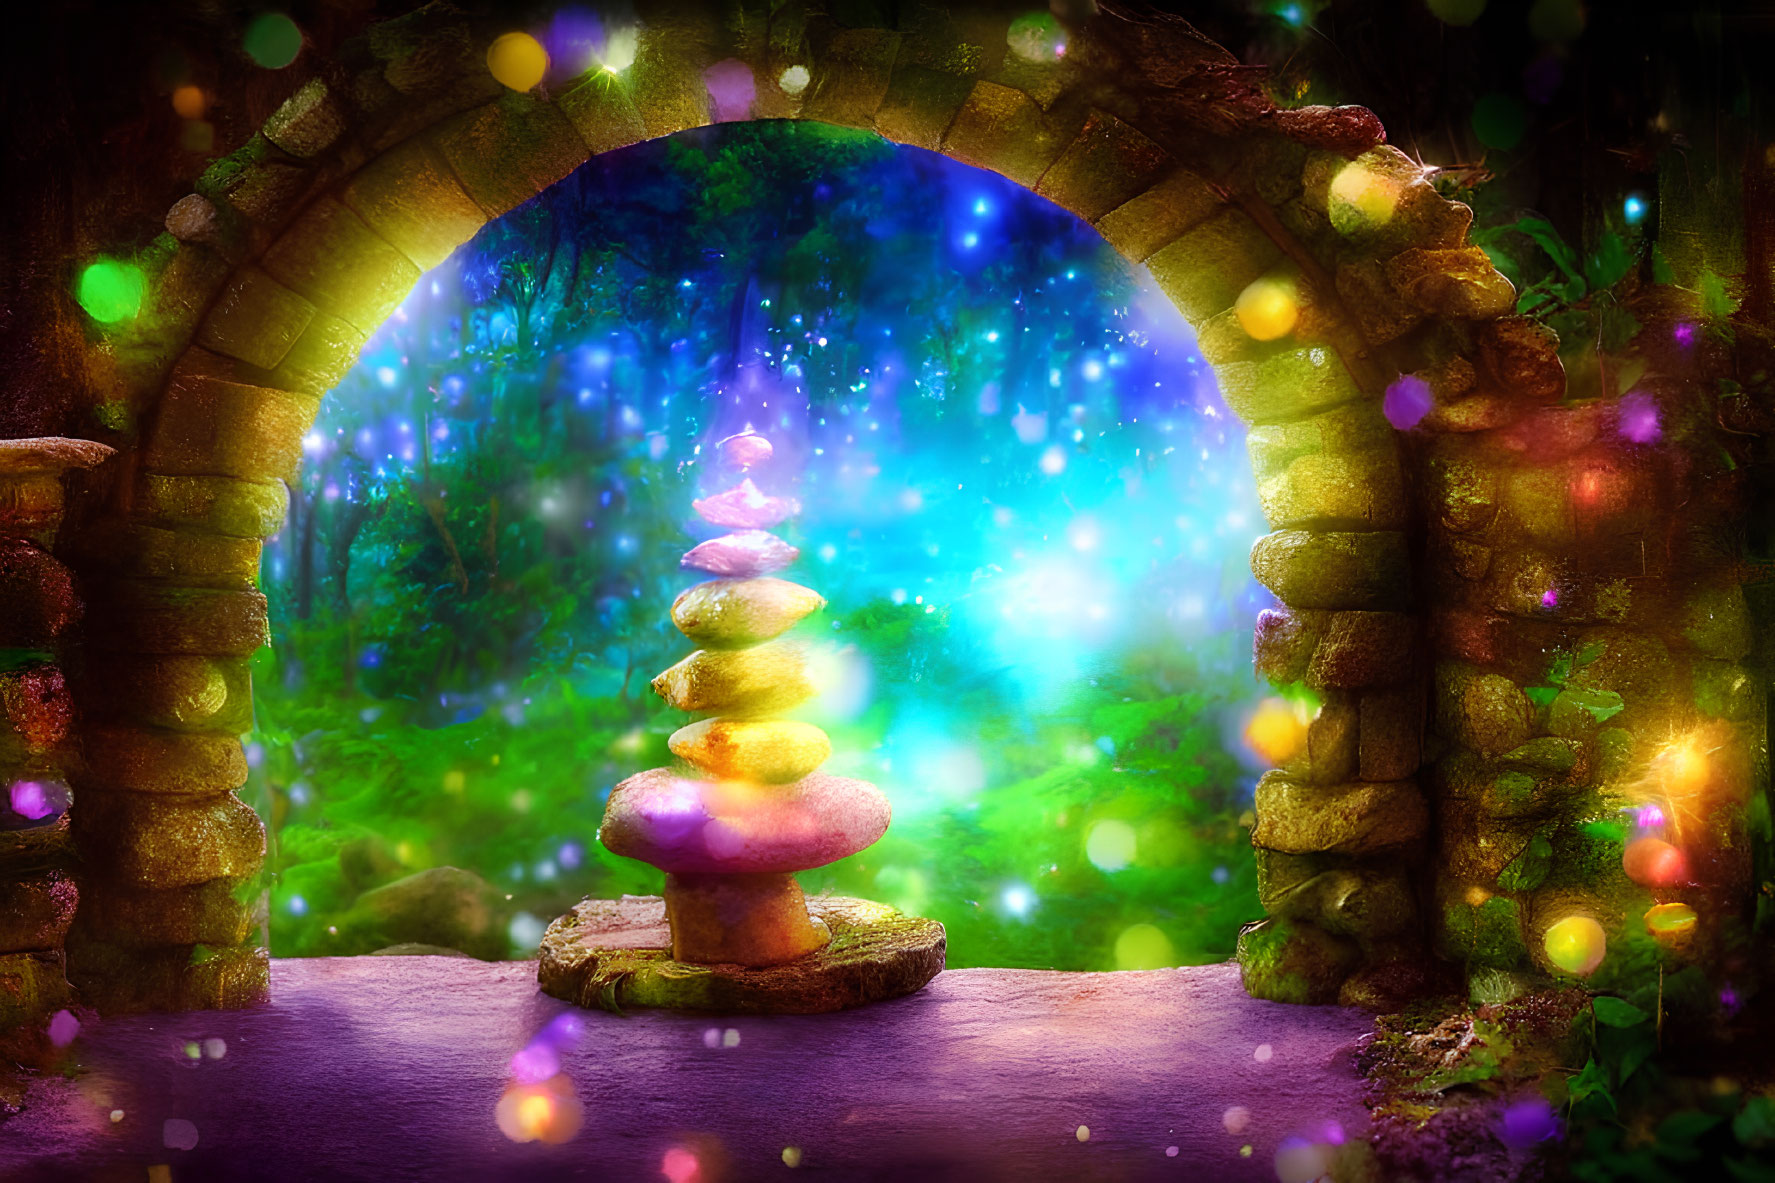 Mystical stone archway in lush forest with glowing cairn & floating orbs